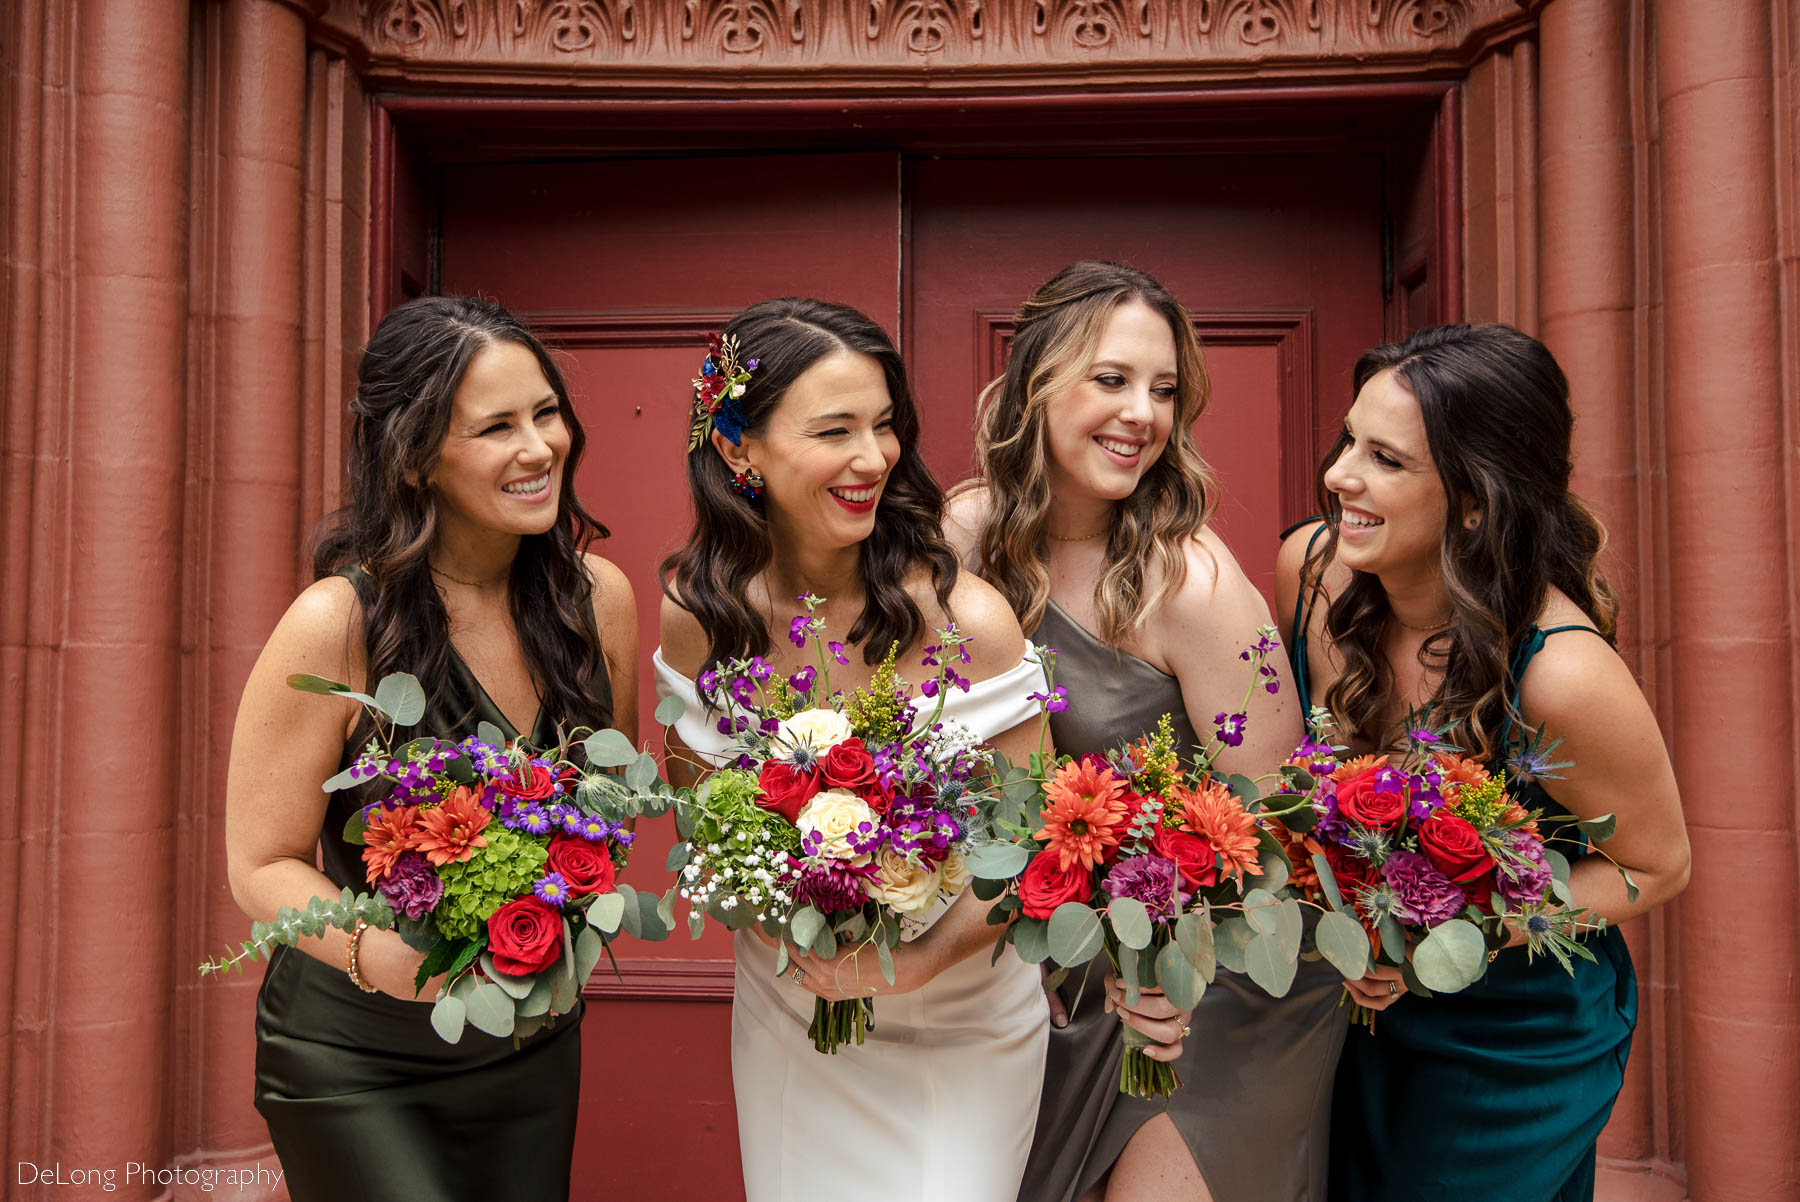 Bride smiling and laughing together with her bridesmaids with colorful jewel-toned bouquets outside the Basilica of the Sacred Heart of Jesus in Atlanta, GA by Charlotte wedding photographers DeLong Photography 